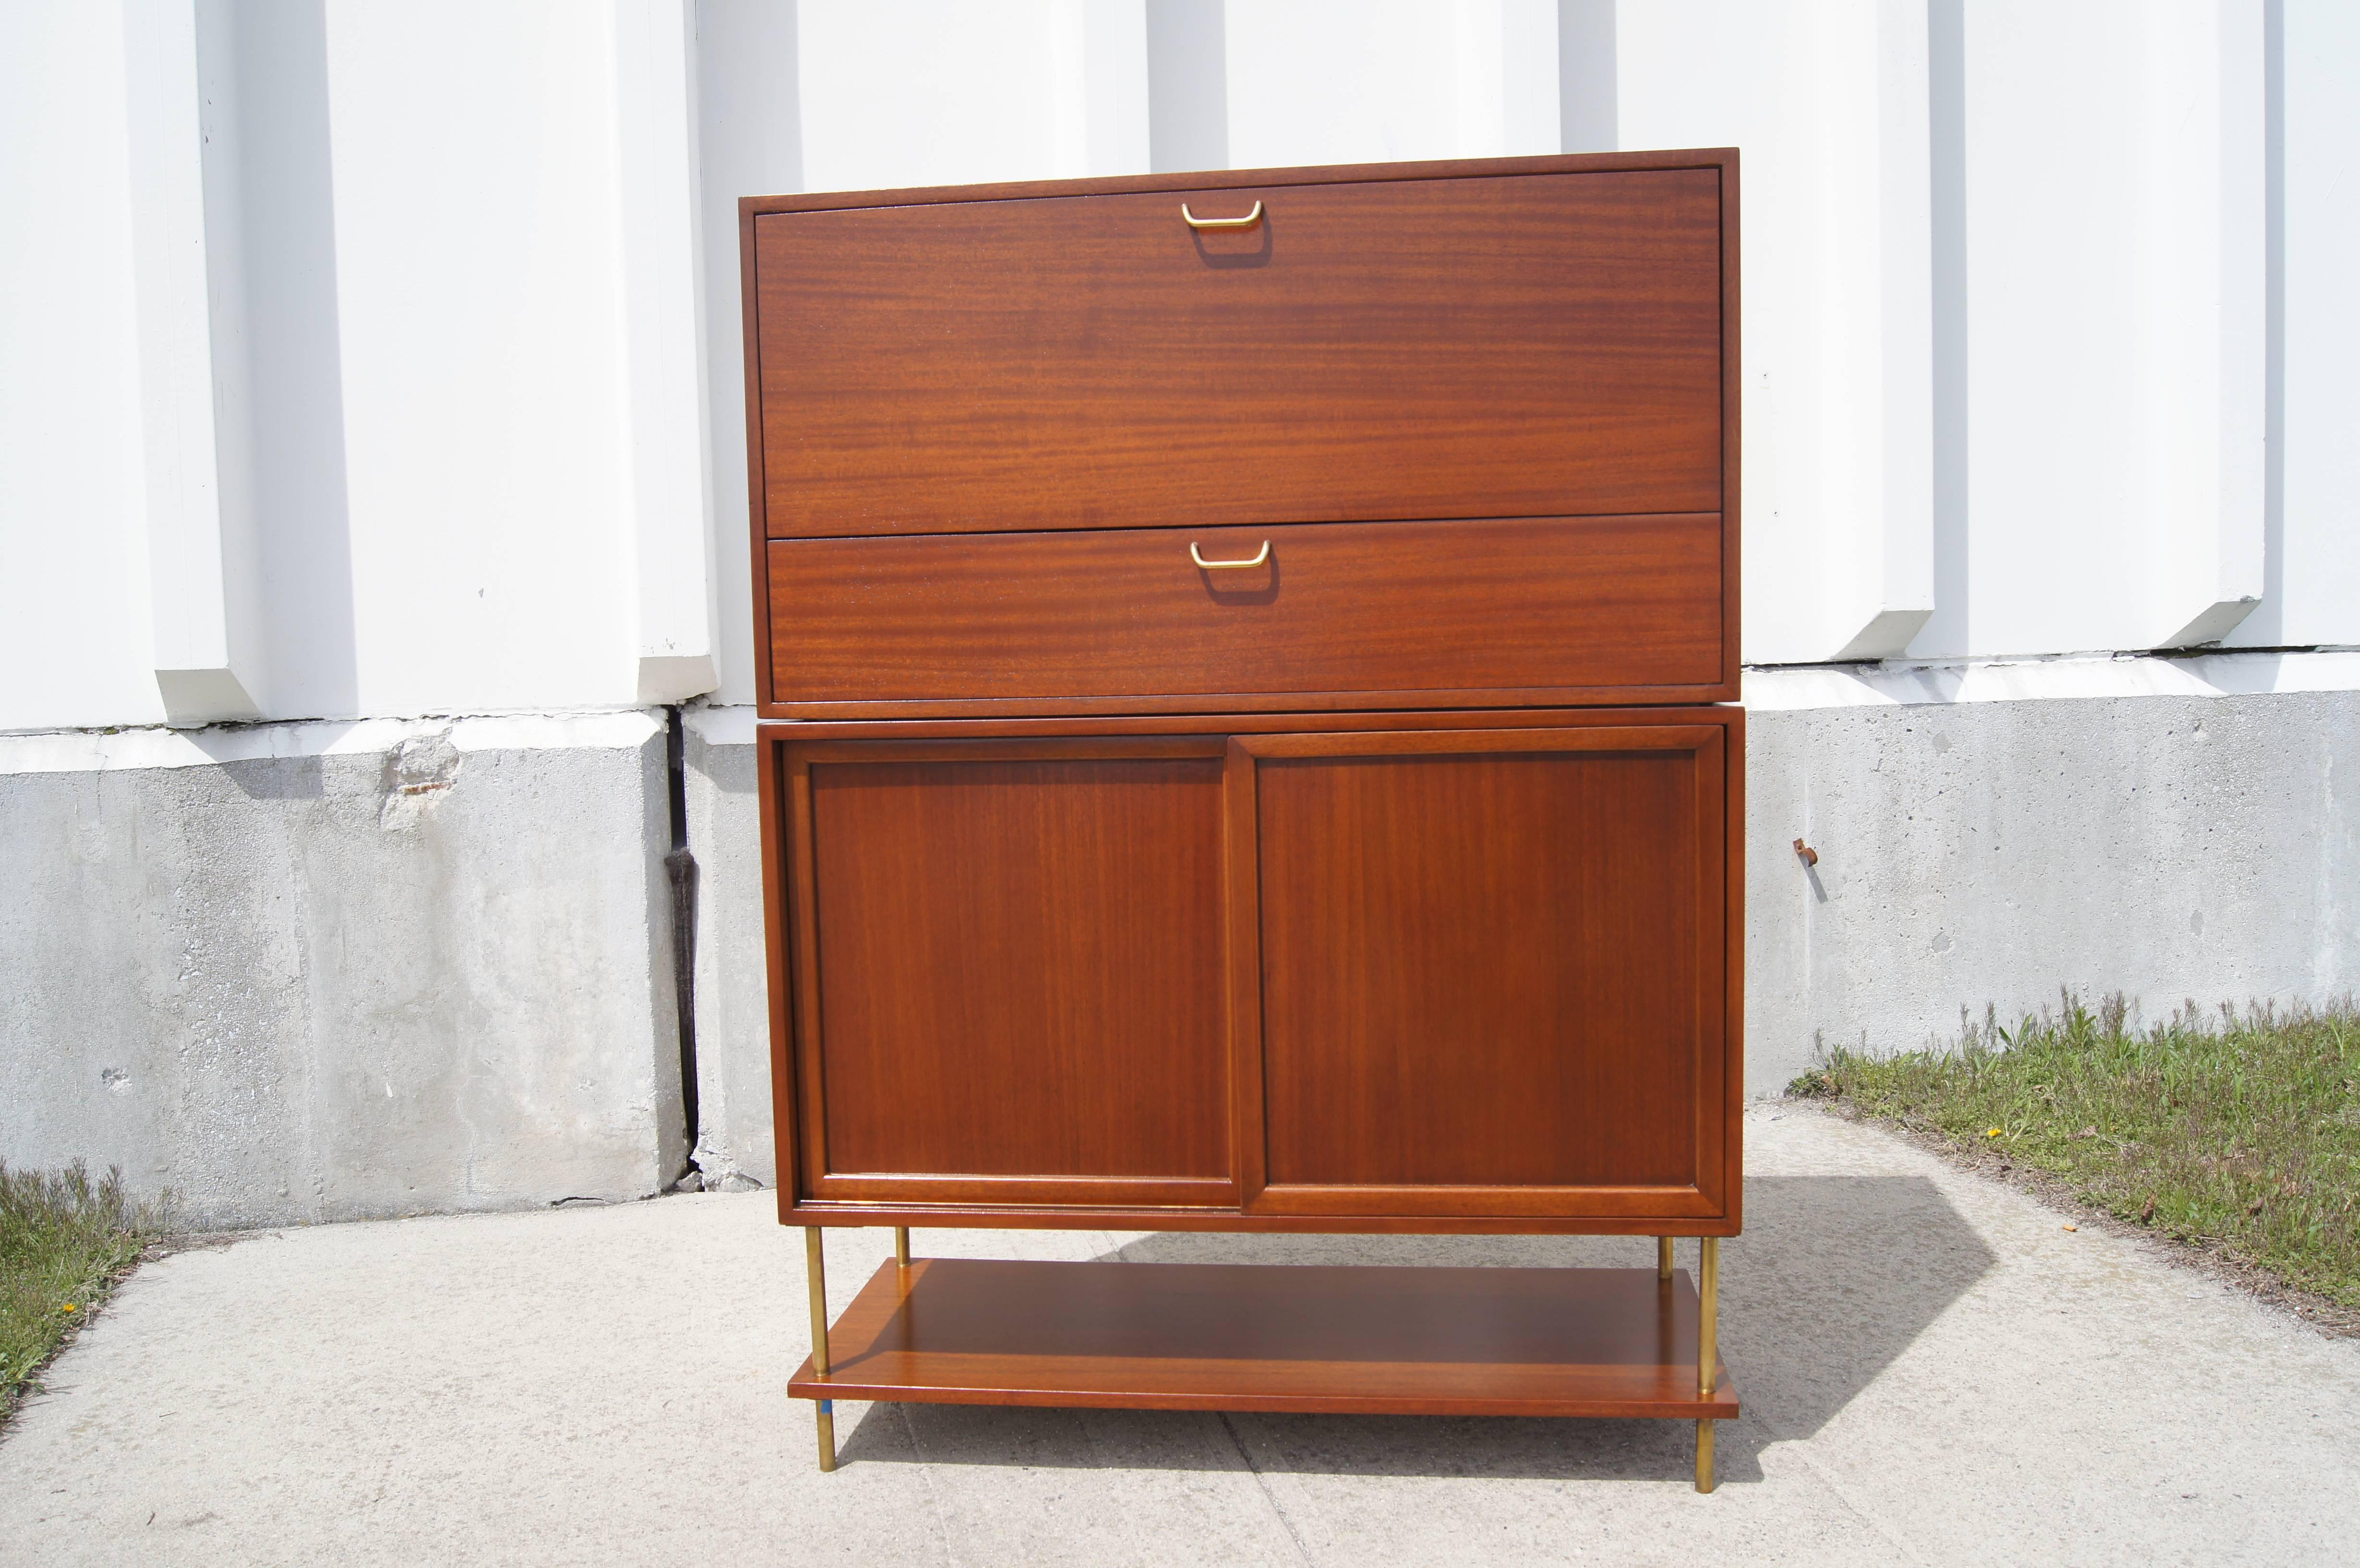 This mahogany and brass bar cabinet by Harvey Probber provides ample storage. The top of the cabinet hinges open to reveal a small laminate drawer and serving space. The lower cabinet has three laminate drawers and an adjustable shelf. Below is an